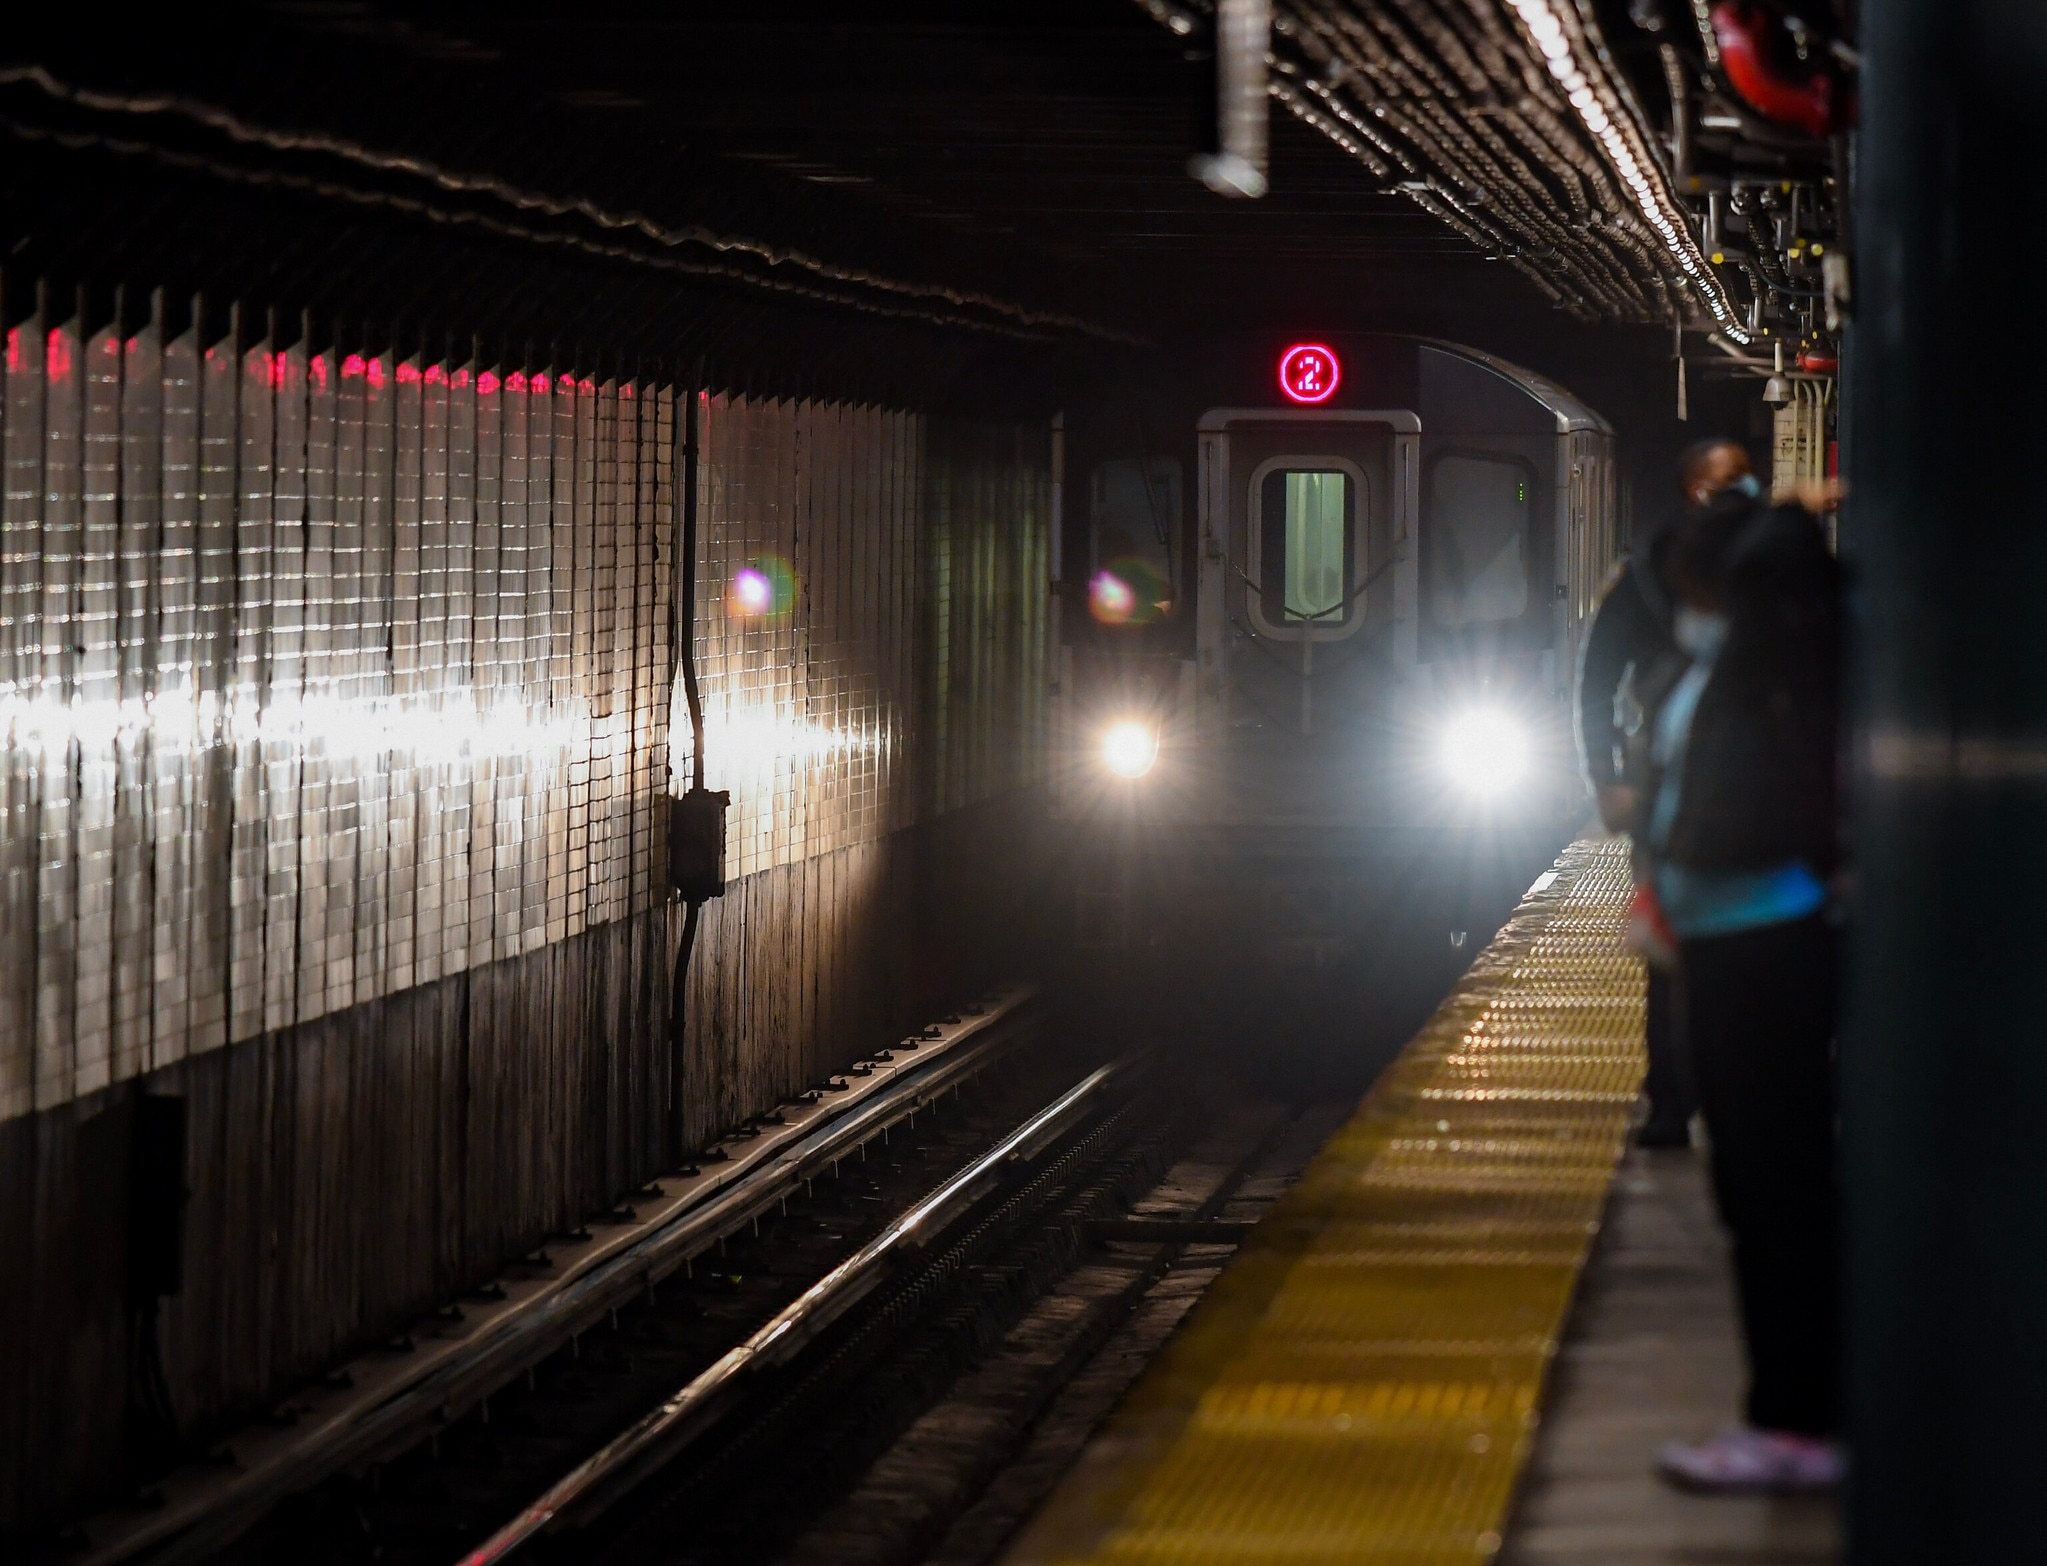 REMINDER: MTA to Begin Accessibility Improvements at 14 St Passageway Connecting Sixth and Seventh Avenue Subway Lines